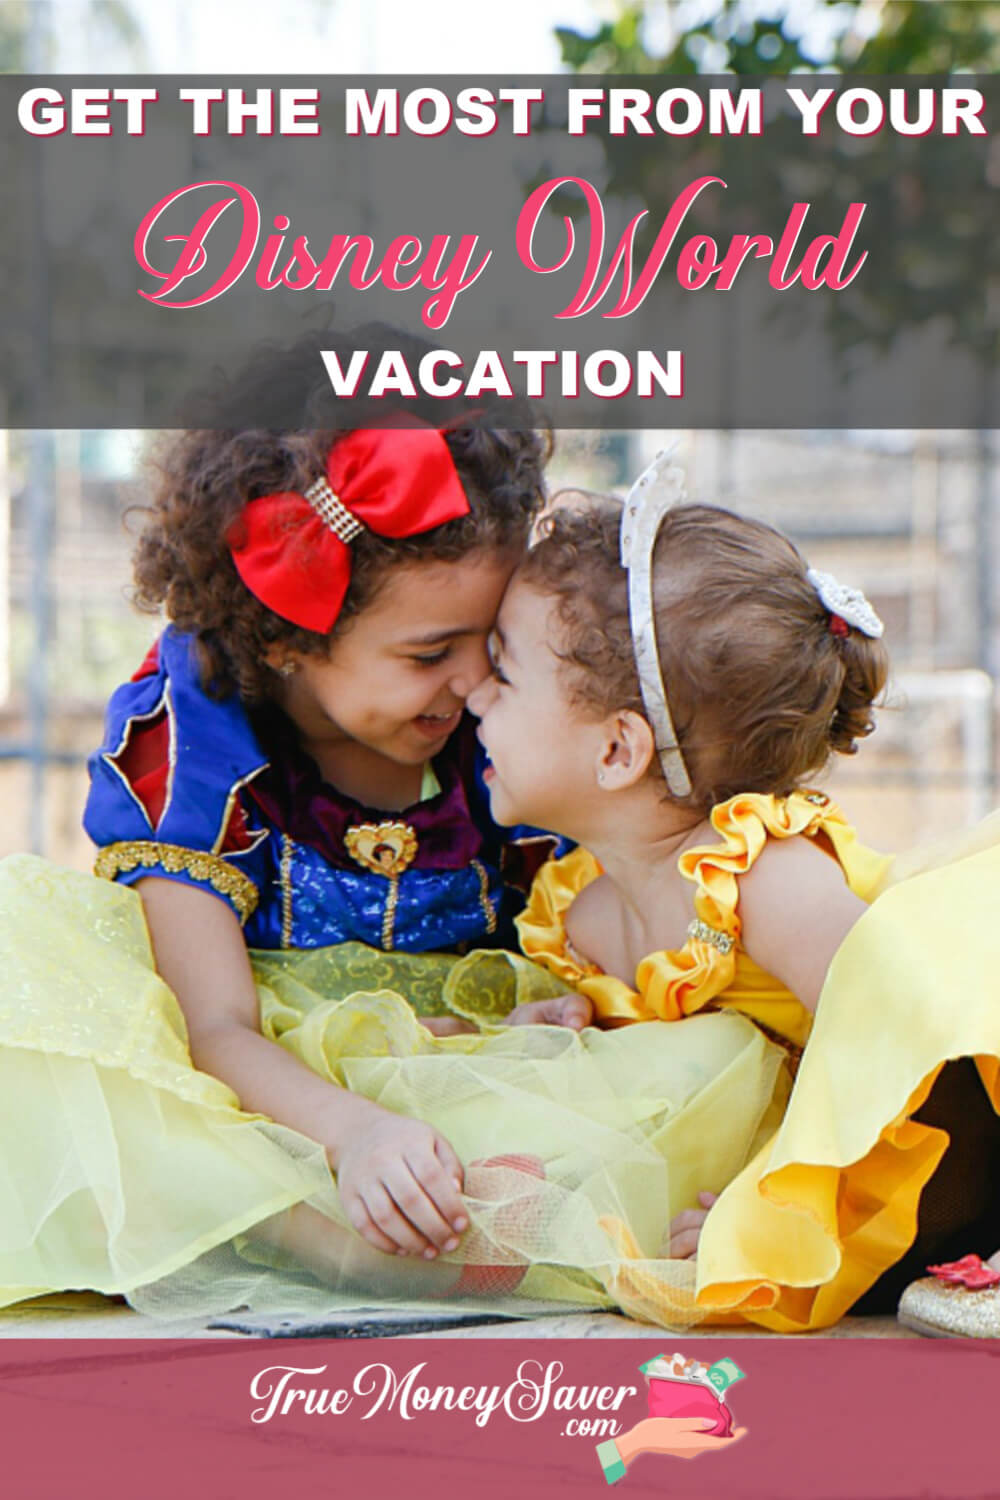 How To Get The Most From Your Walt Disney World Vacation